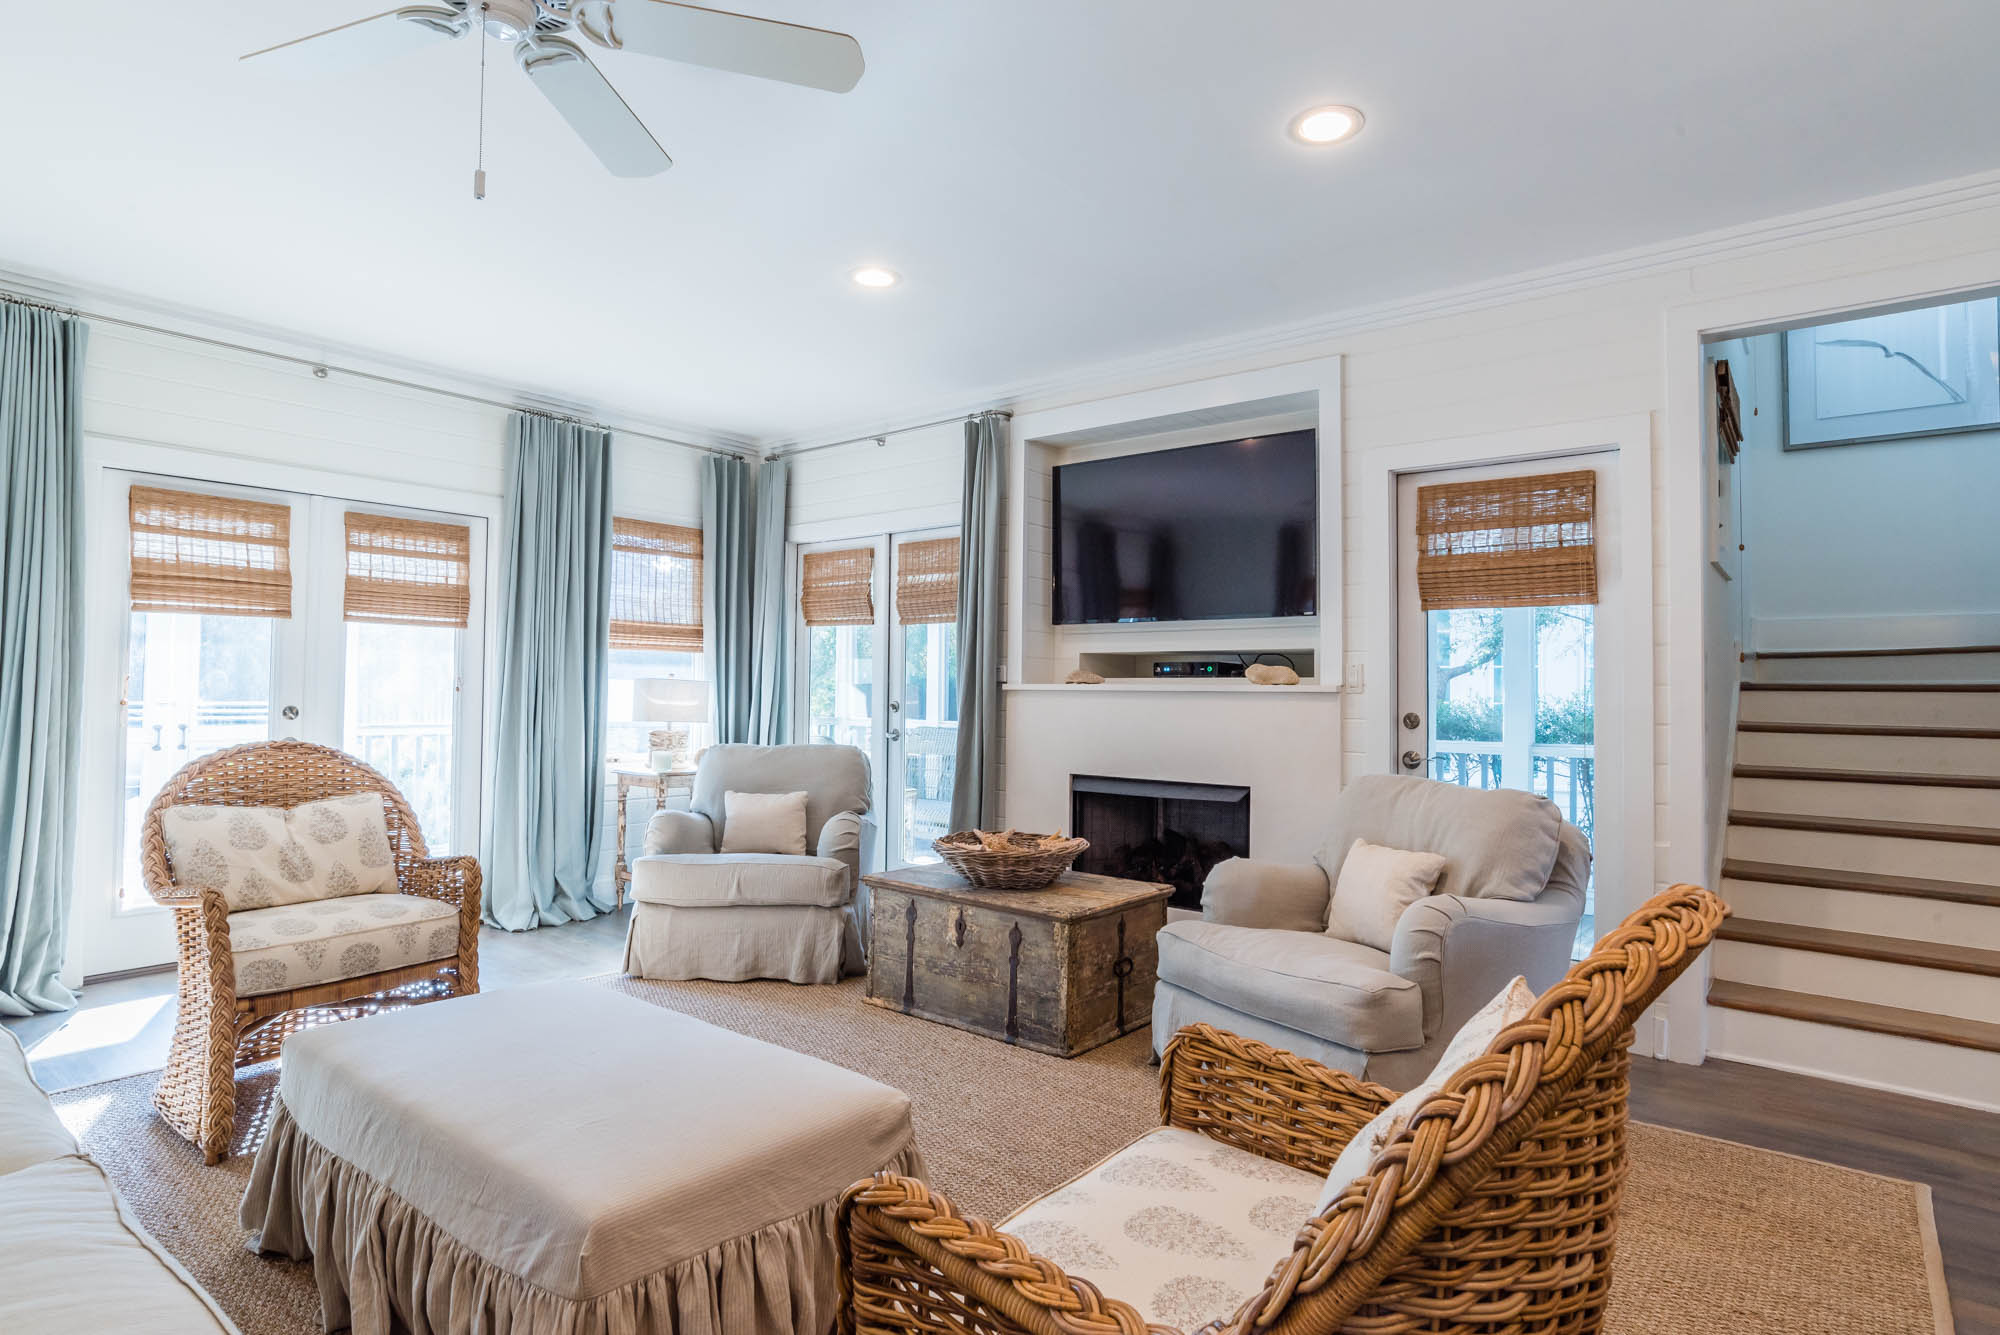 Learn About Our 30a Rentals